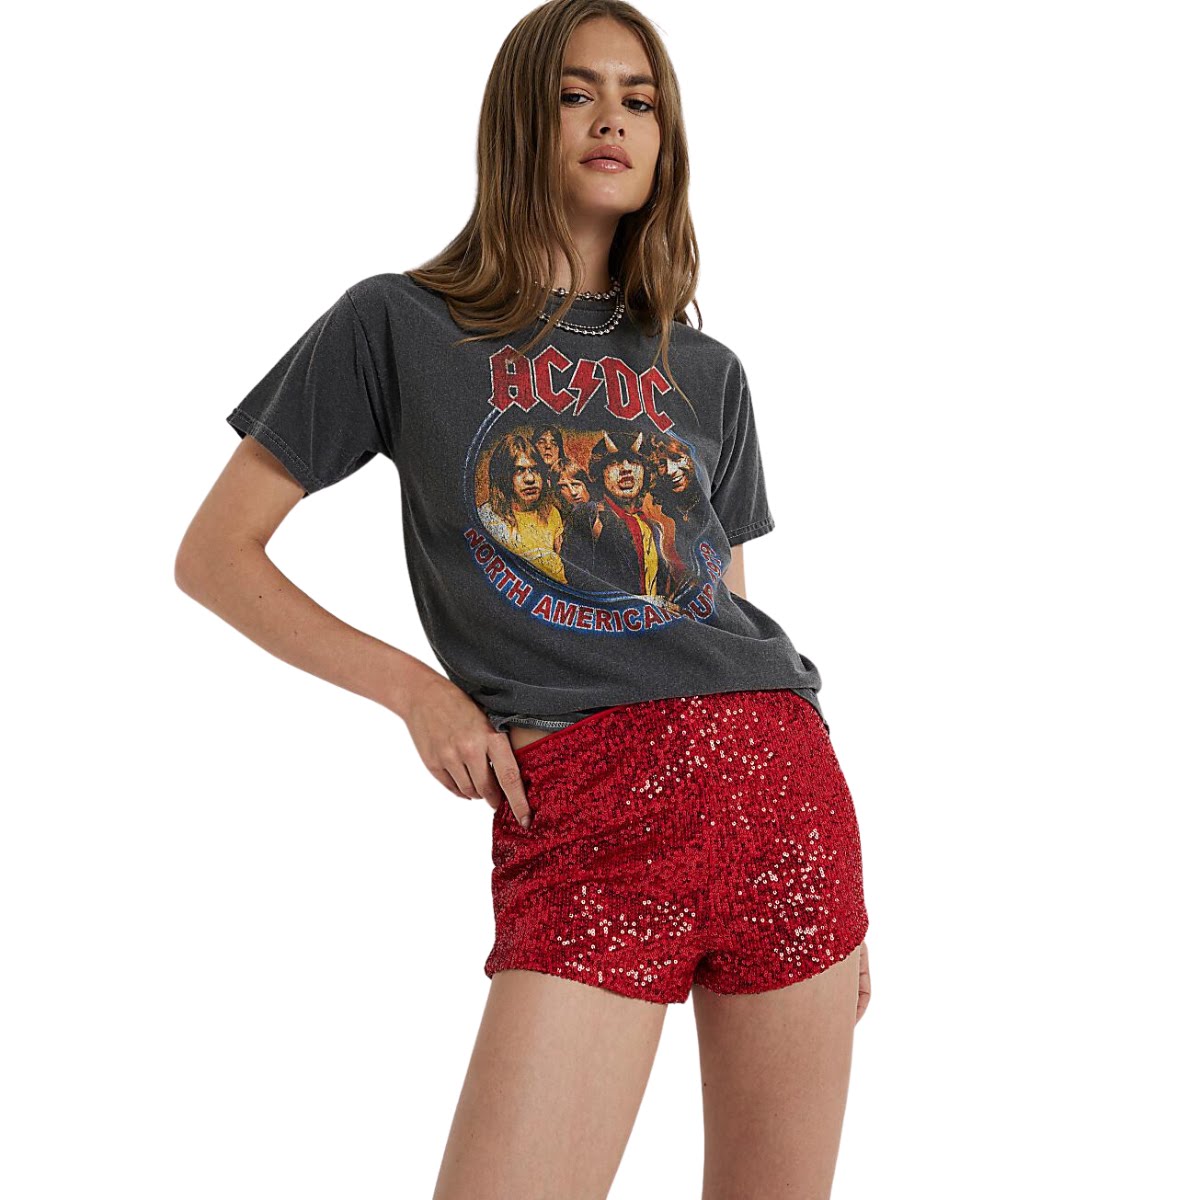 Red Sequin Hotpant Shorts, €32, River Island